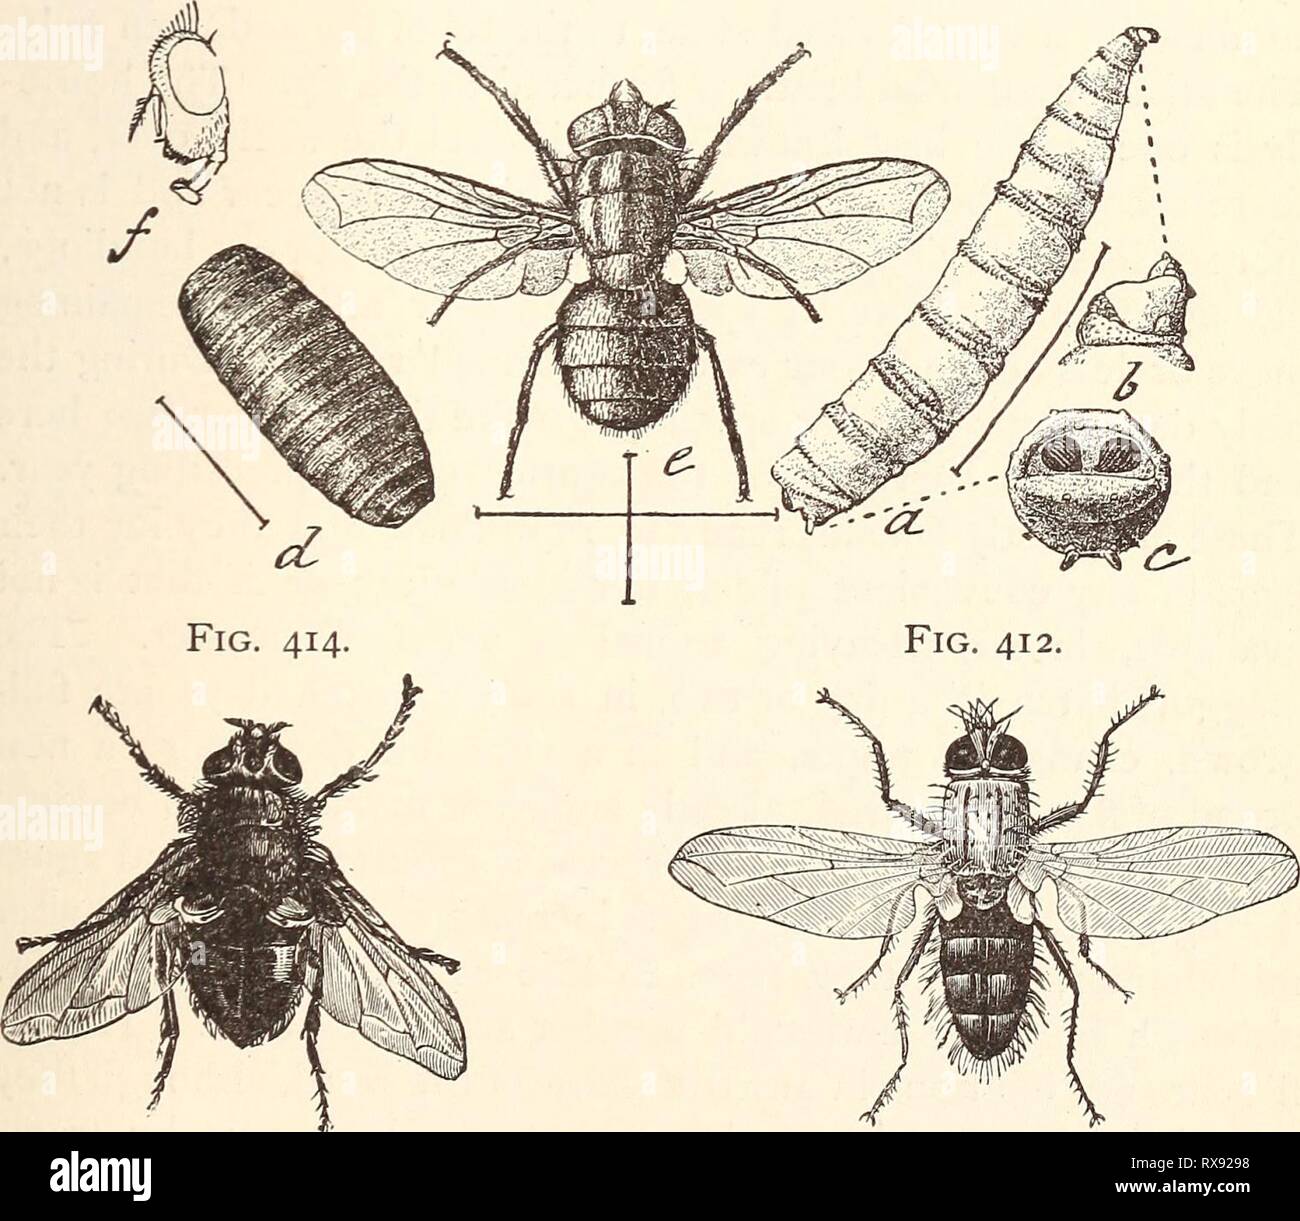 Economic entomology for the farmer Economic entomology for the farmer.. economicentomolo00smit 0 Year: 1896  Fig. 415.   Muscid flies.—Fig. 410, Exorista flavicauda, yellow-tailed Tachinid. Fig. 411, ISe- morea leucanics, Tachinid on cut-worms : larva, pupa, adult, and the white eggs on the anterior segments of the caterpillar. Fig. 412, Lydella doryphorcs, Tachinid on potato-beetle. Fig. 413, common flesh-fly, Sarcophaga carnaria. Fig. 414, the blow- fly, Calliphora vomitoria. Fig. 415, screw-worm, Lucilia tnacellaria : a, b, c, larva and details; rf, pupa ; ^, adult; /, head from side. All a Stock Photo